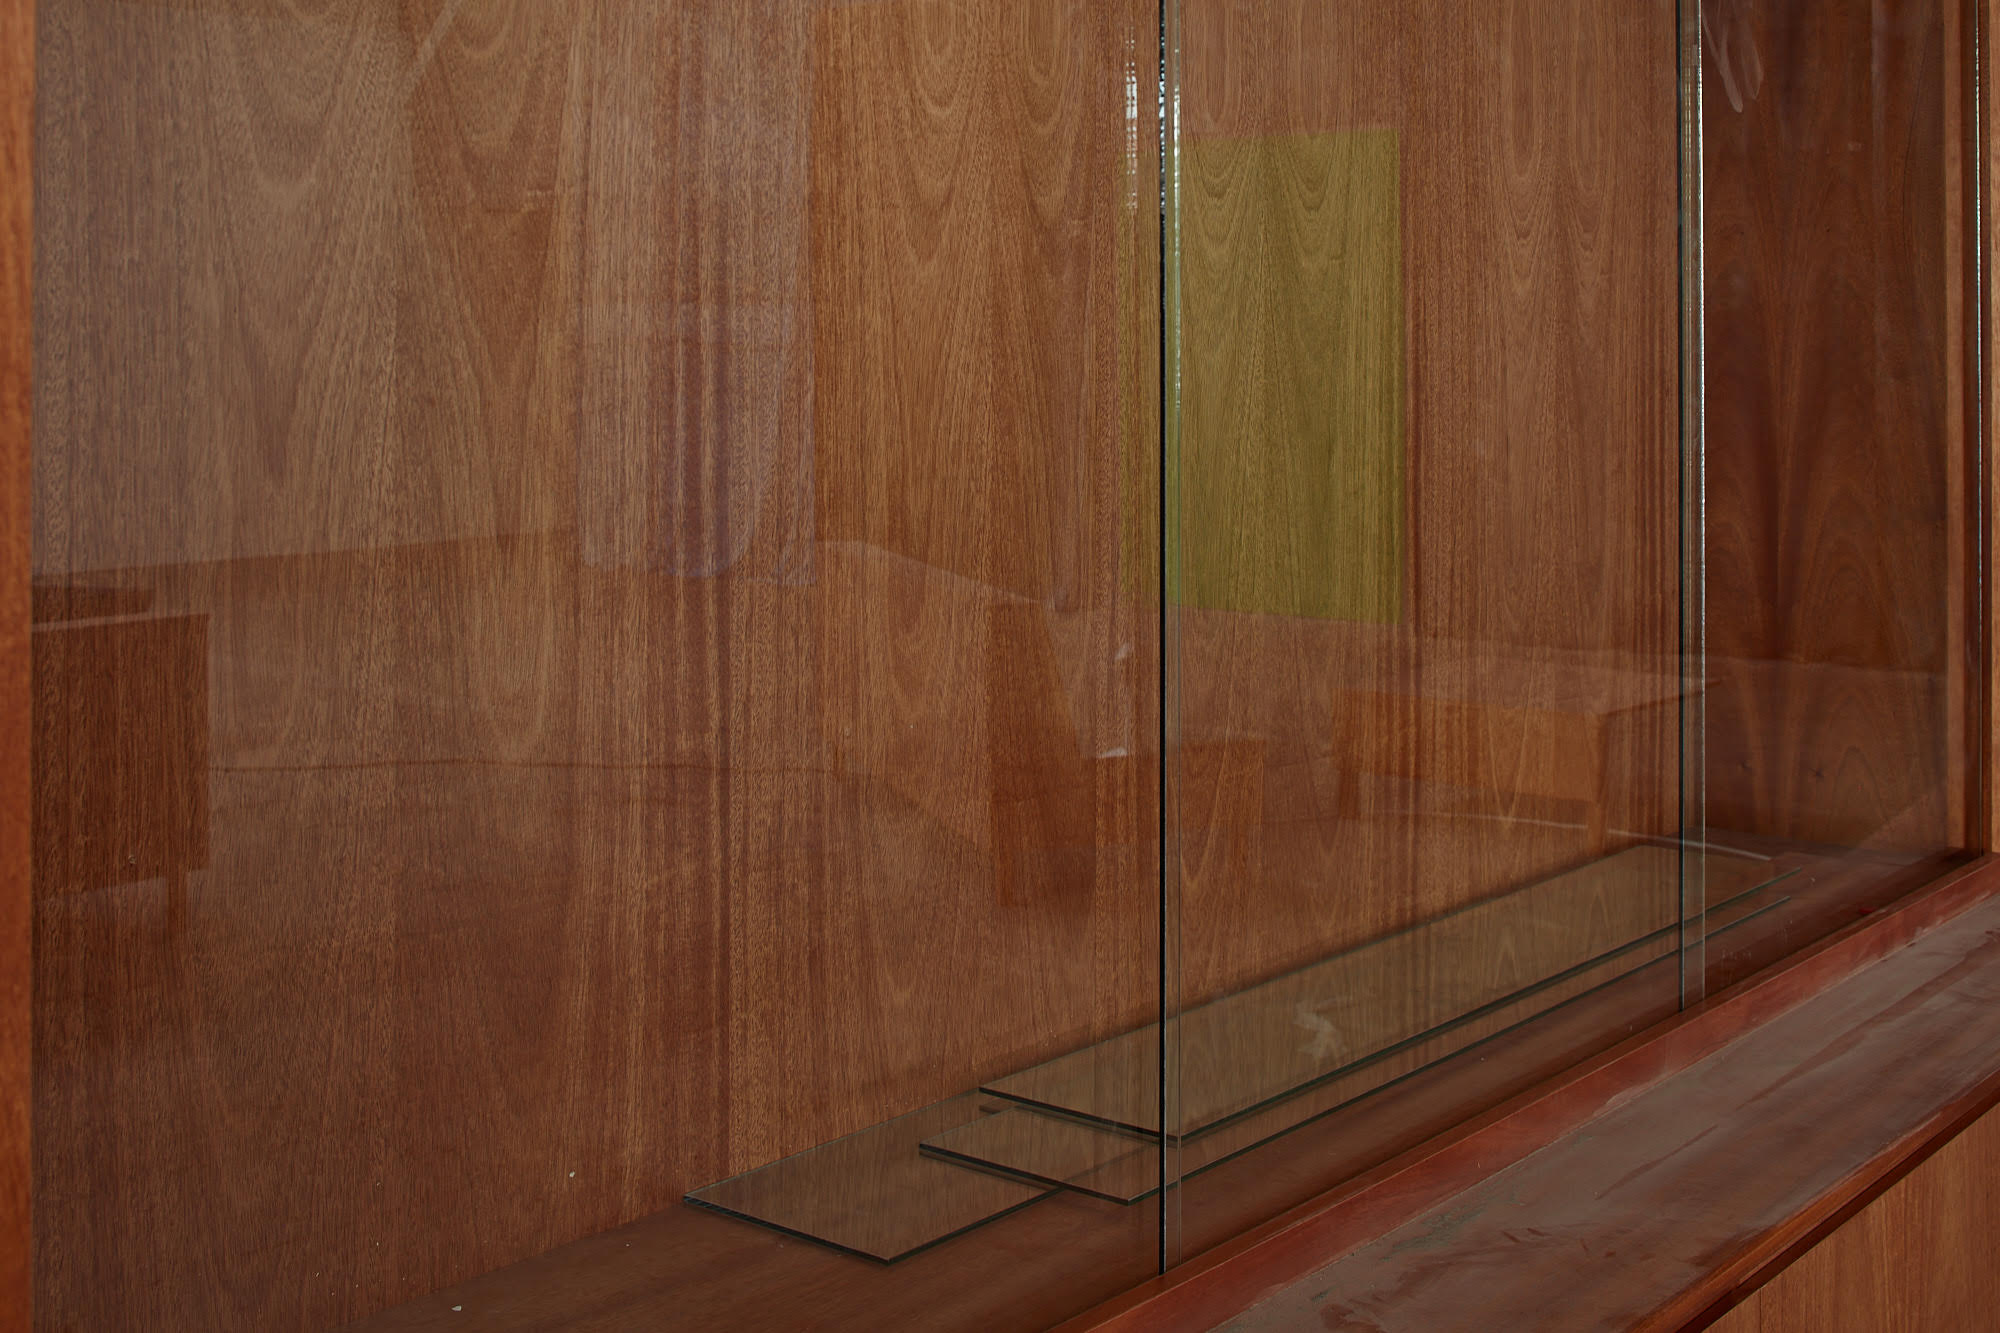 A closeup shot of a wooden cabinet with glass doors. A faint reflection of the surrounding room is visible in the glass, including scattered furniture and a doorway rendered in green paint.